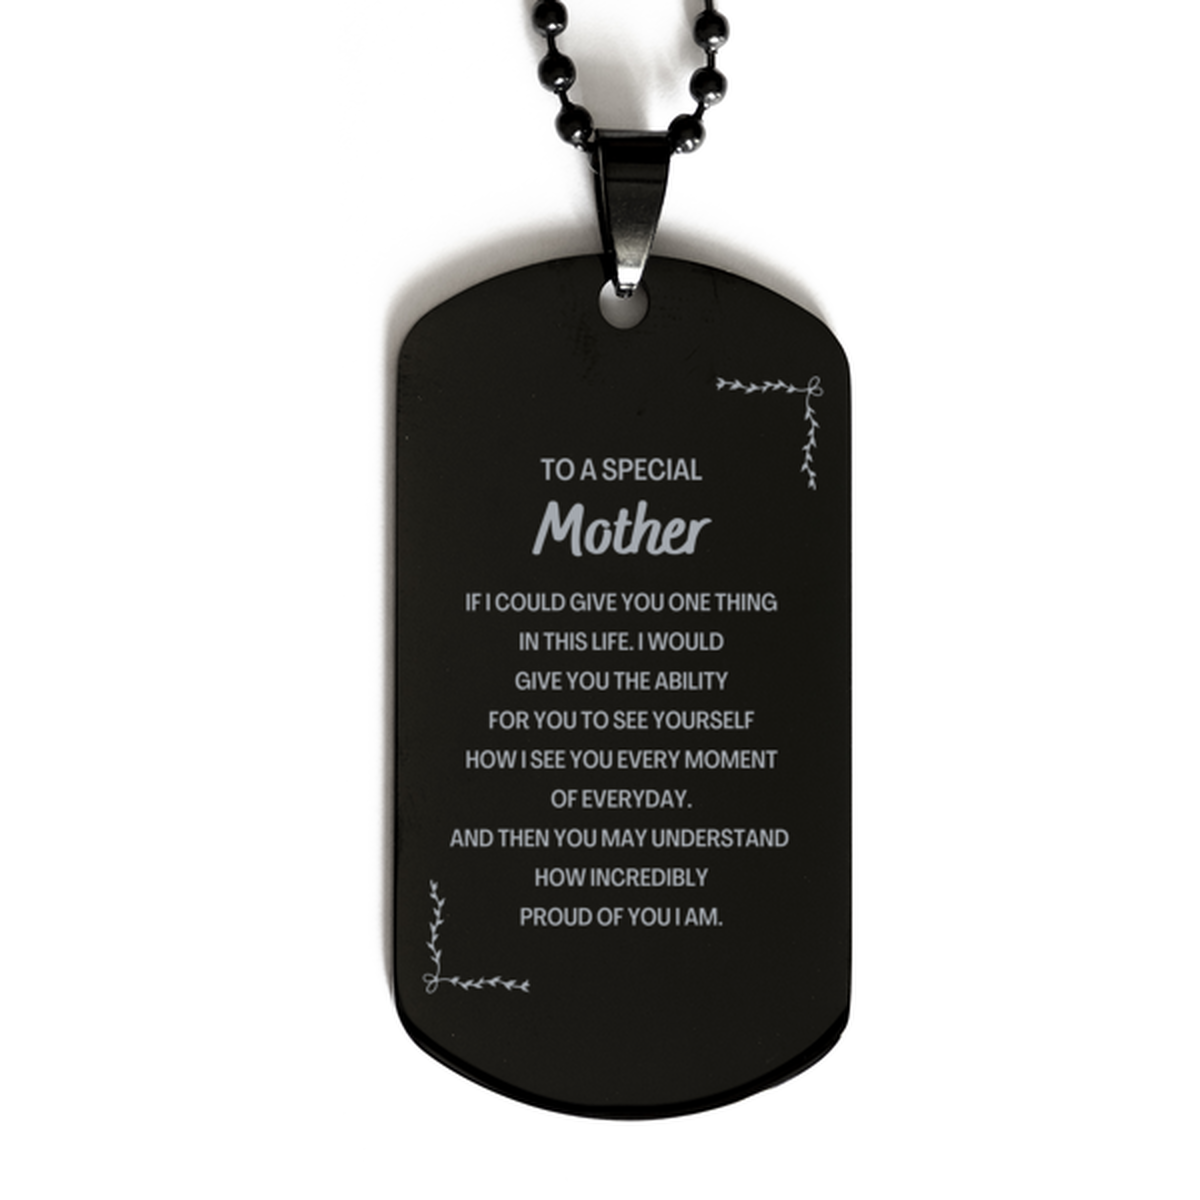 To My Mother Black Dog Tag, Gifts For Mother Engraved, Inspirational Gifts for Christmas Birthday, Epic Gifts for Mother To A Special Mother how incredibly proud of you I am